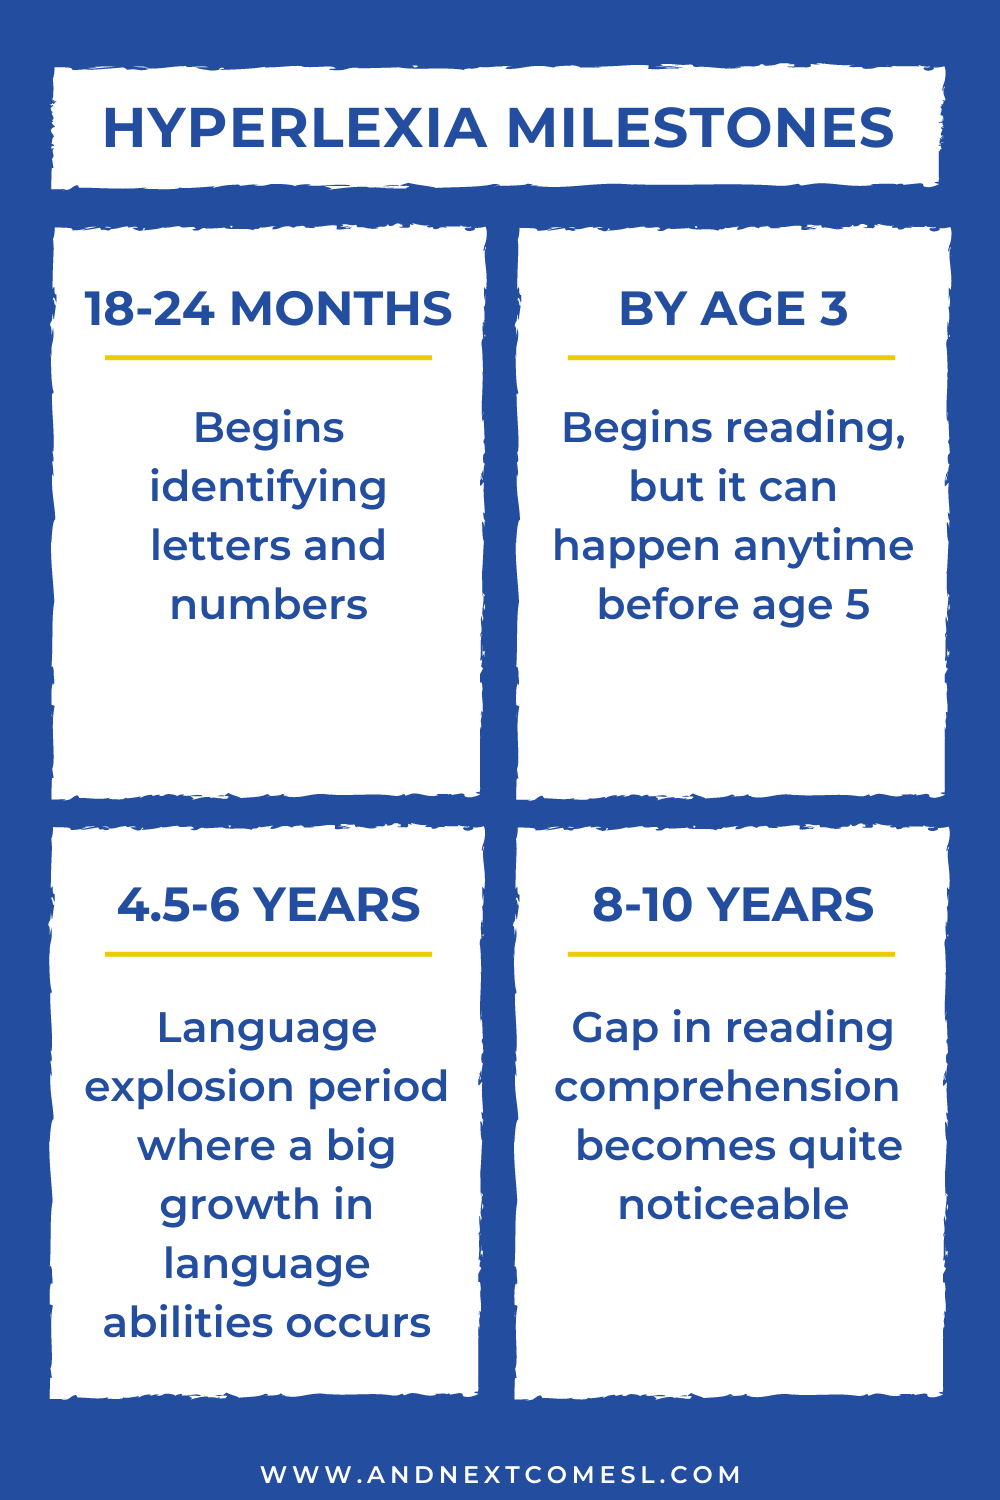 At what age does hyperlexia start?